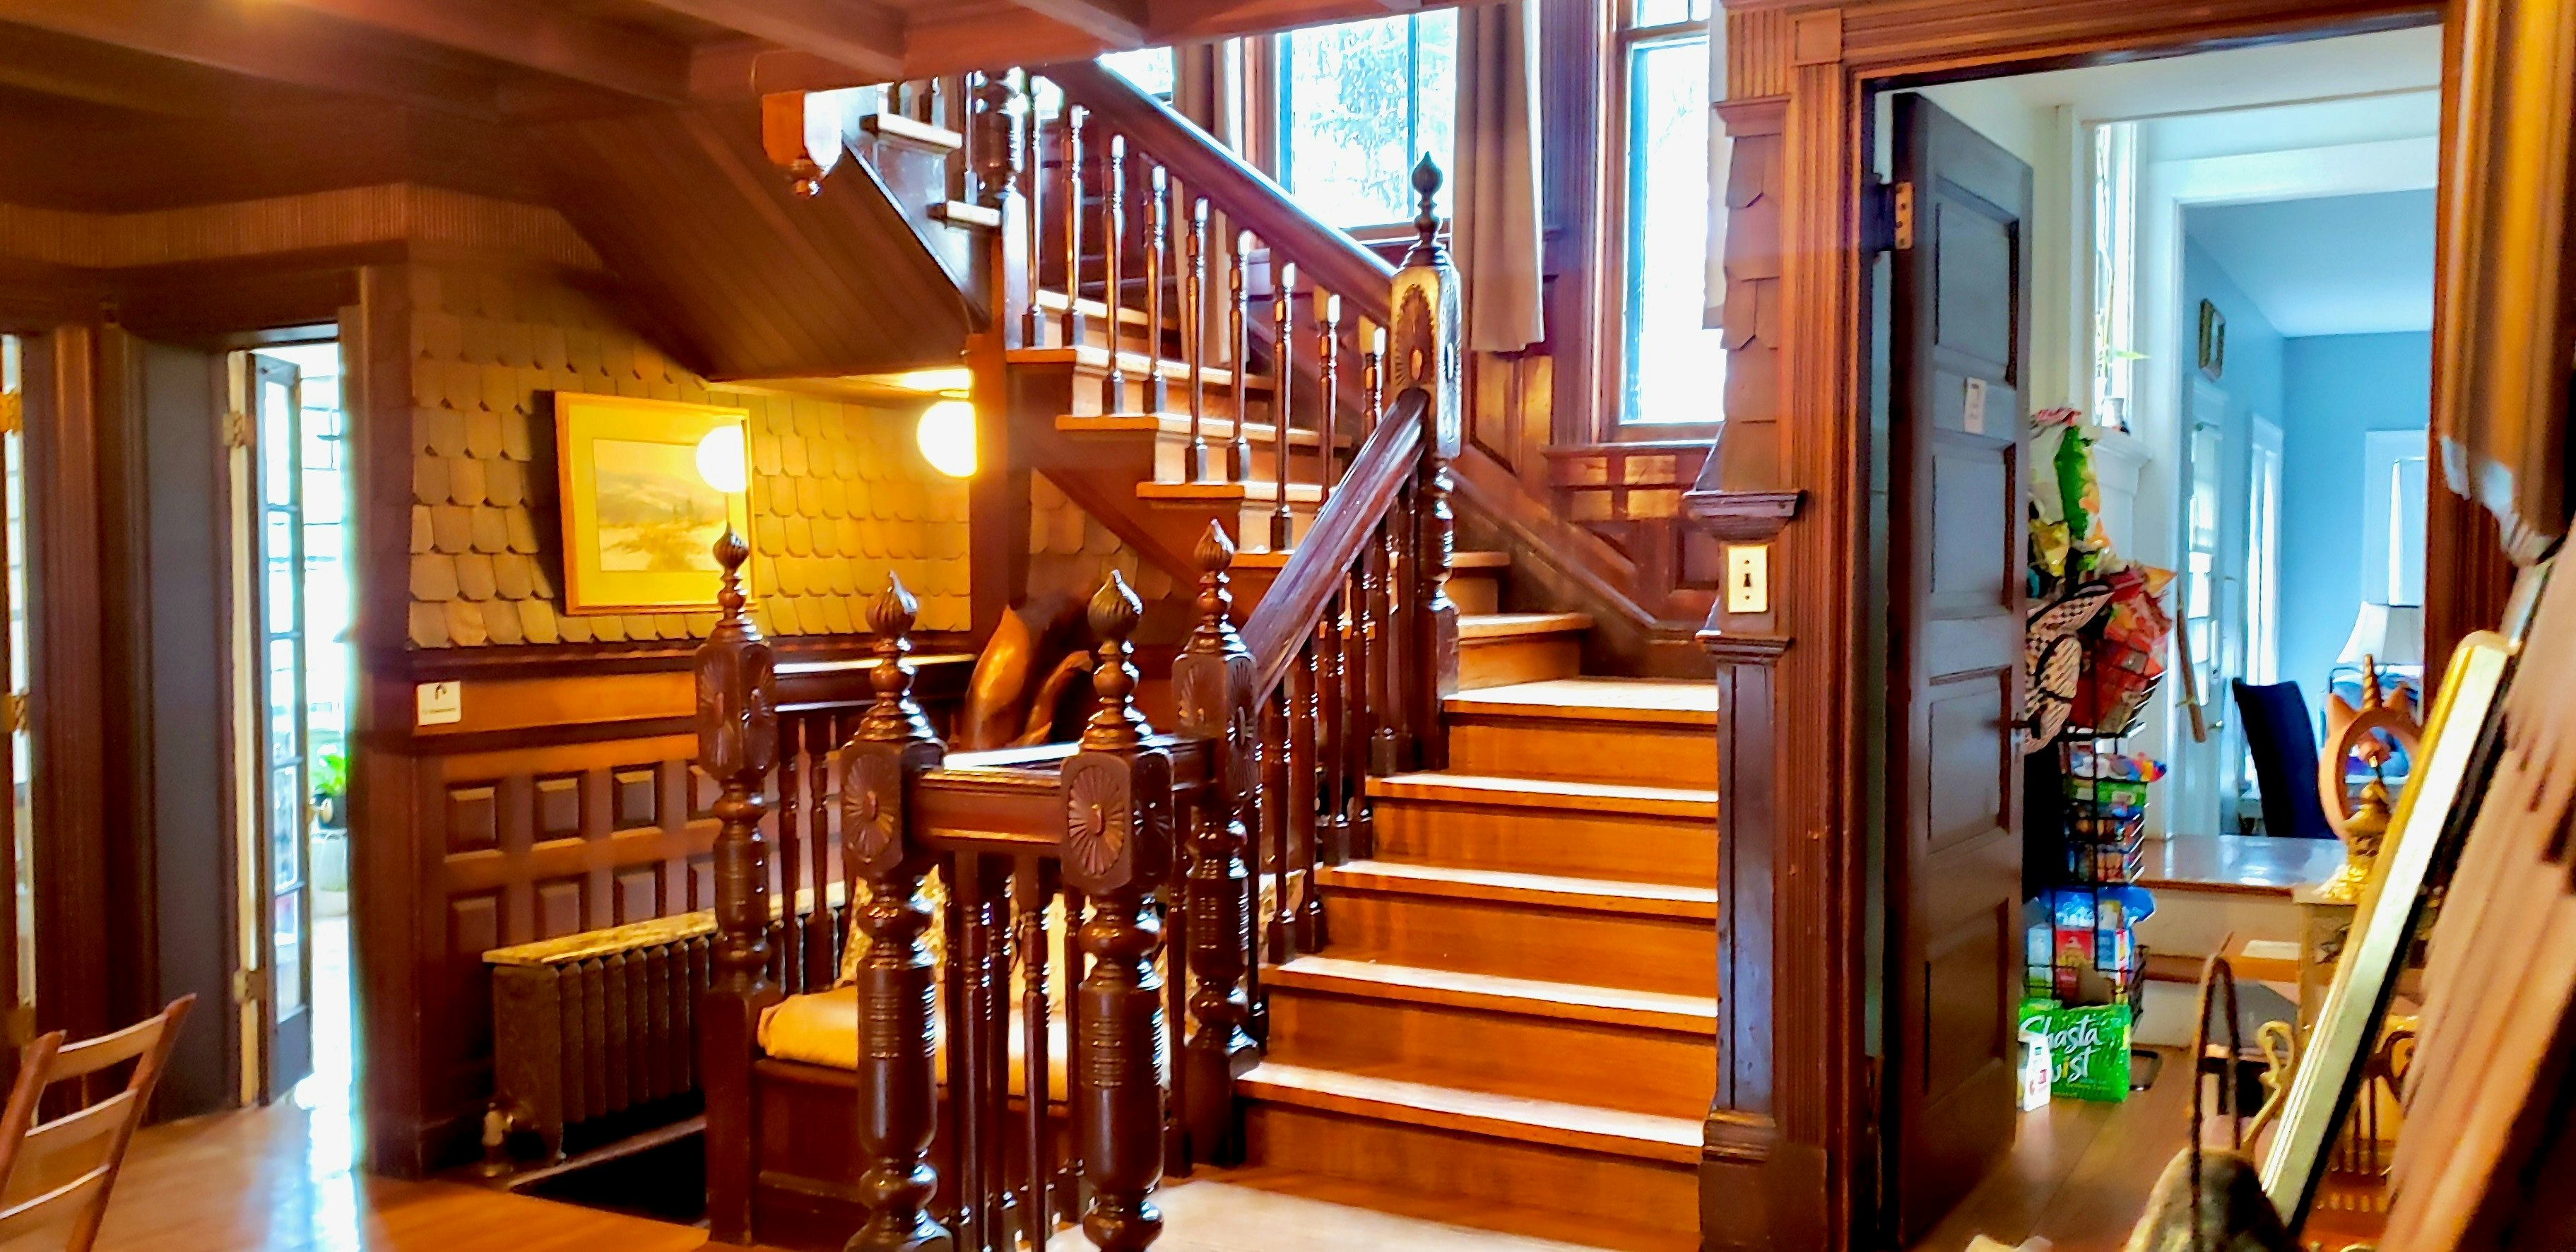 The staircase in the living room is a grand feature of the home that includes a built-in bench and is made of solid, intricately carved wood.